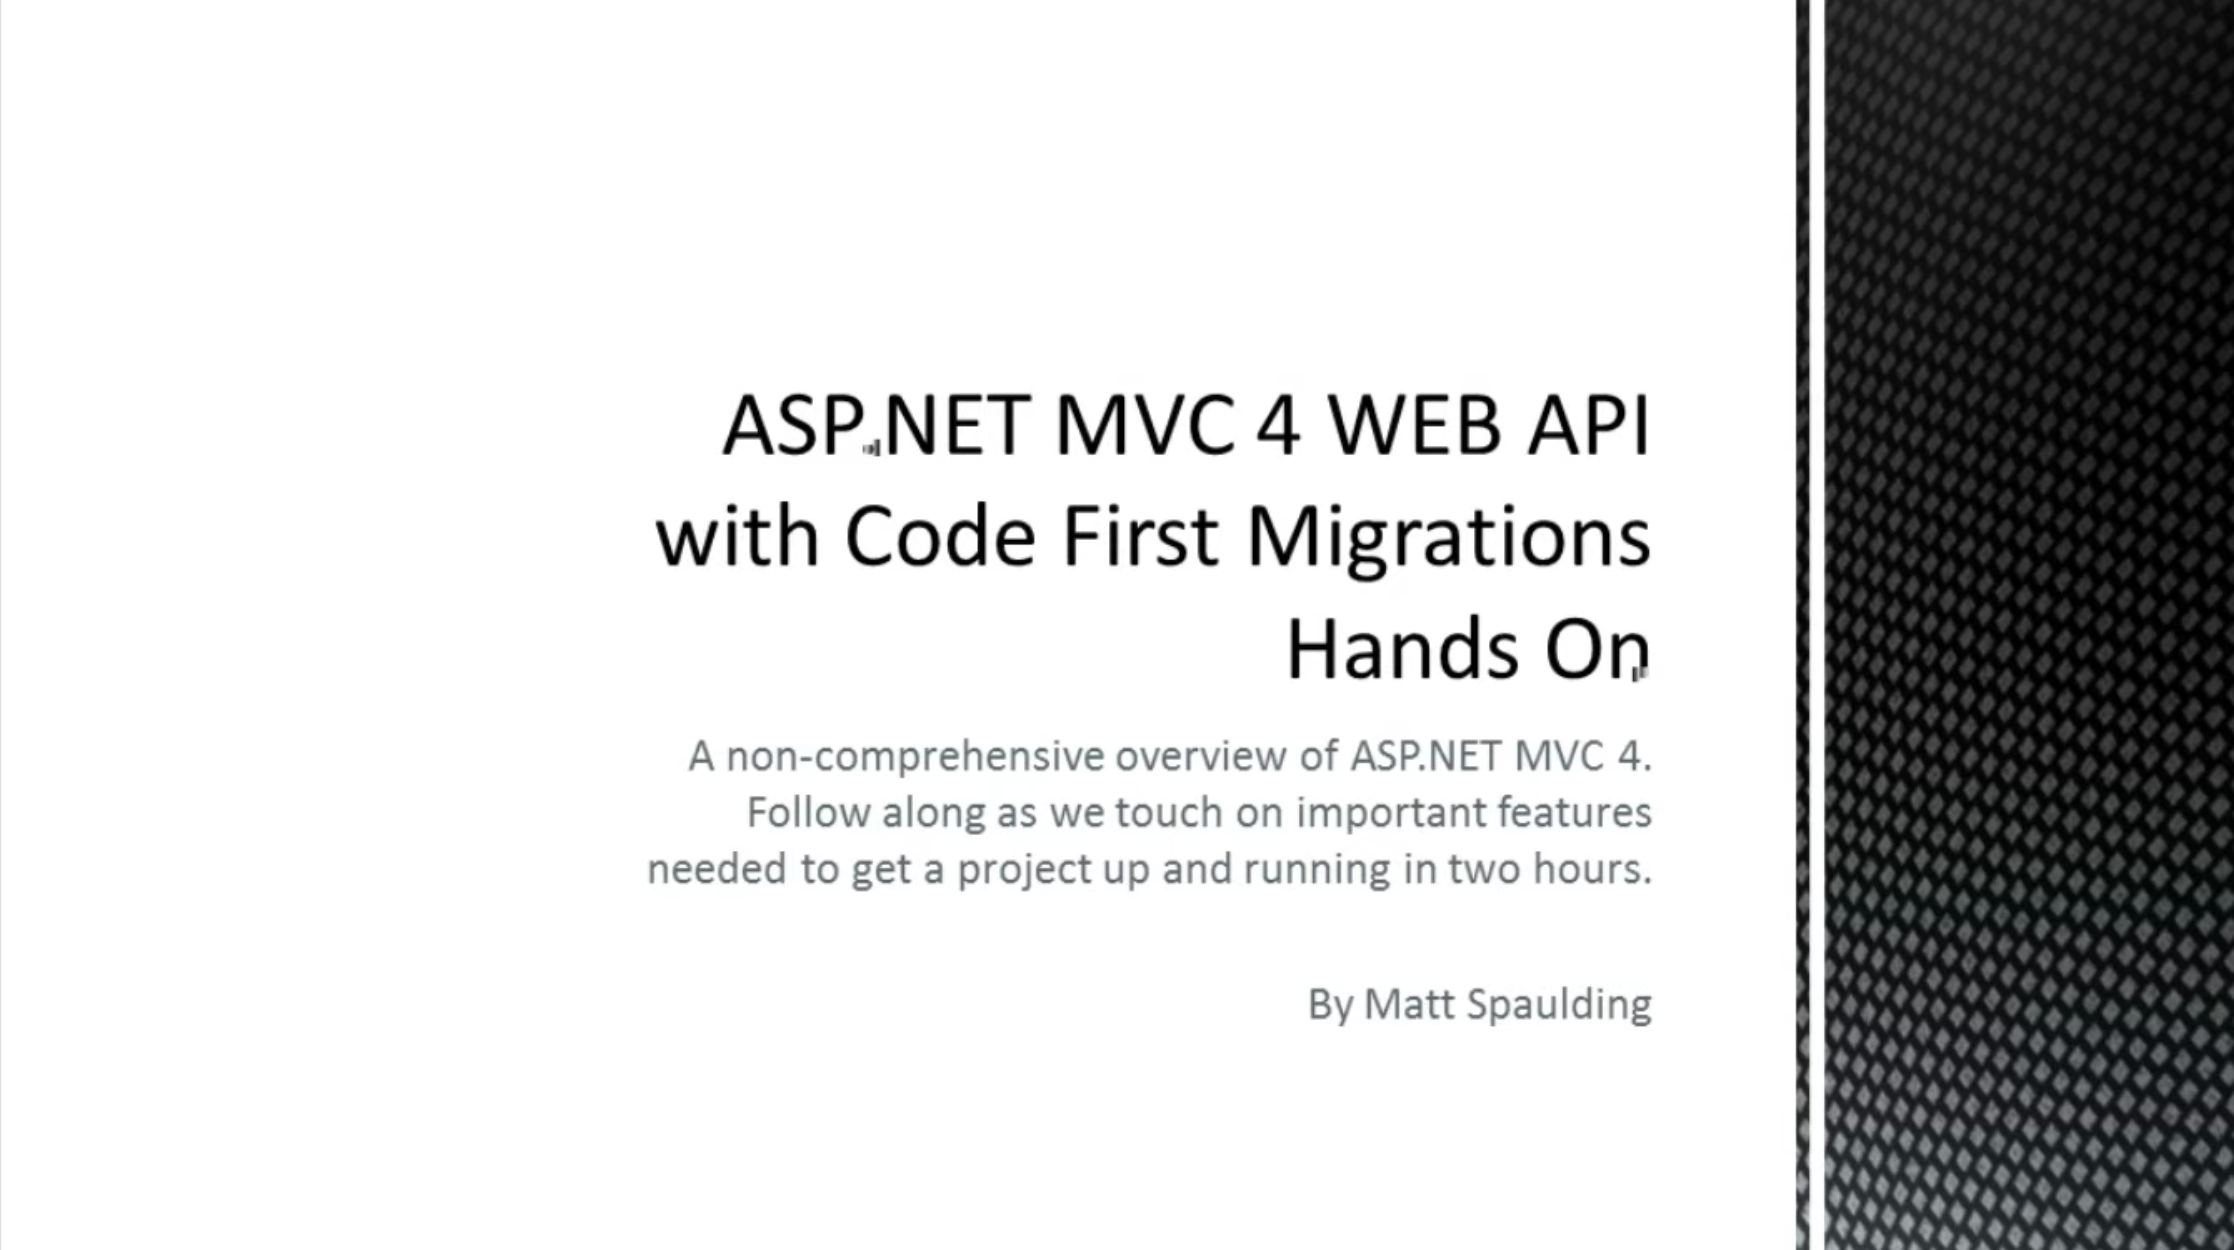 ASP.NET MVC 4 Web API with Code First Migrations